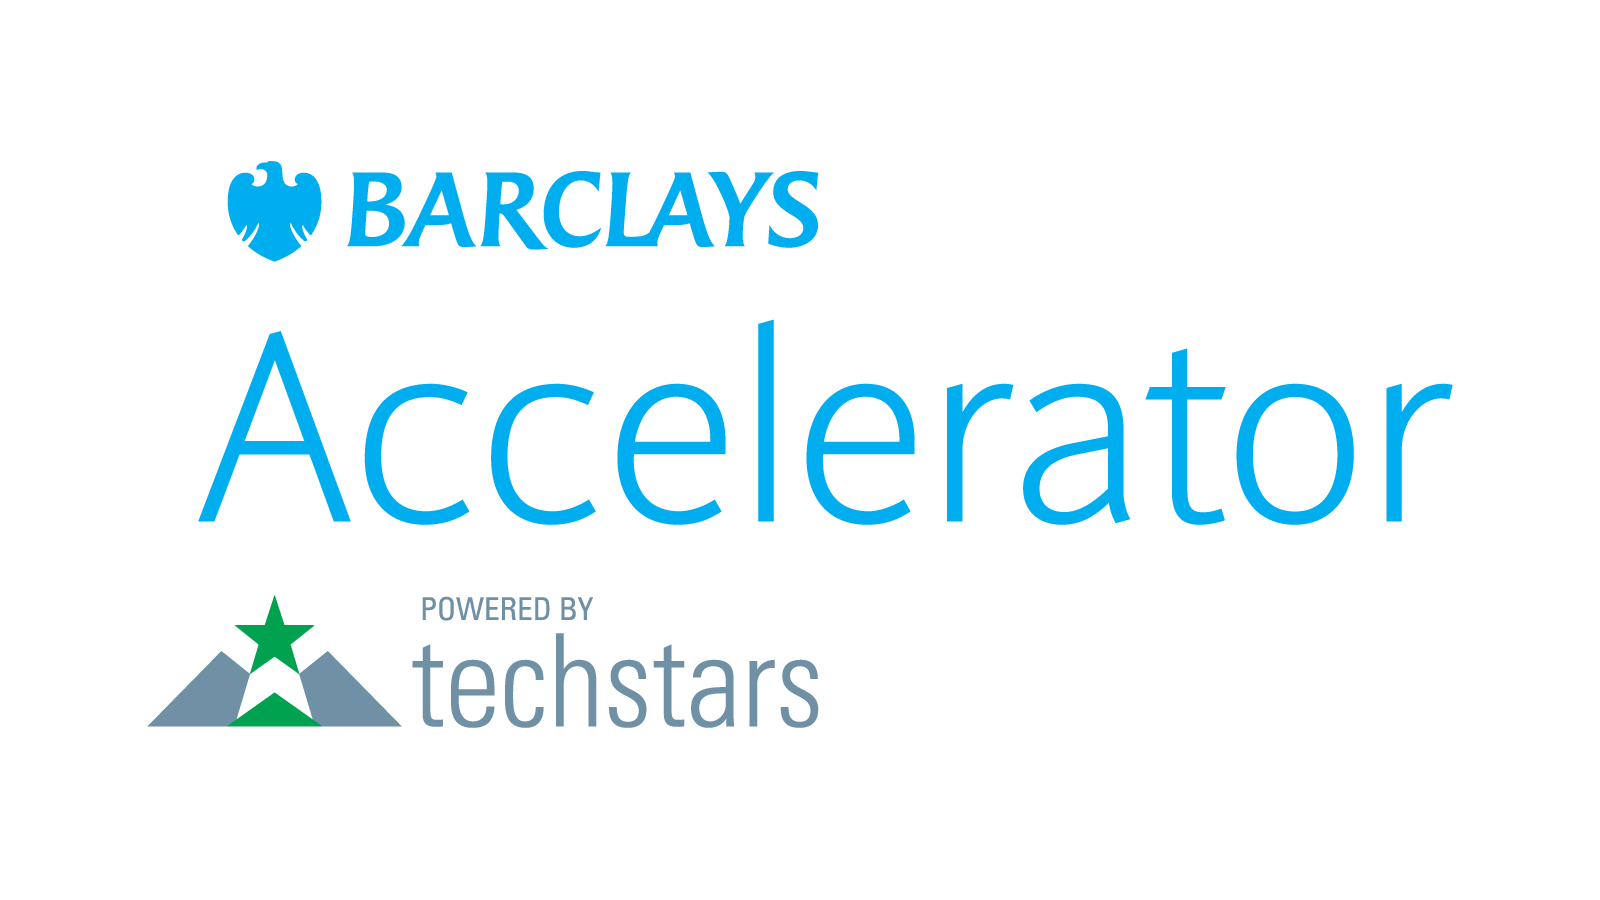 Barclays Accelerator, powered by Techstars